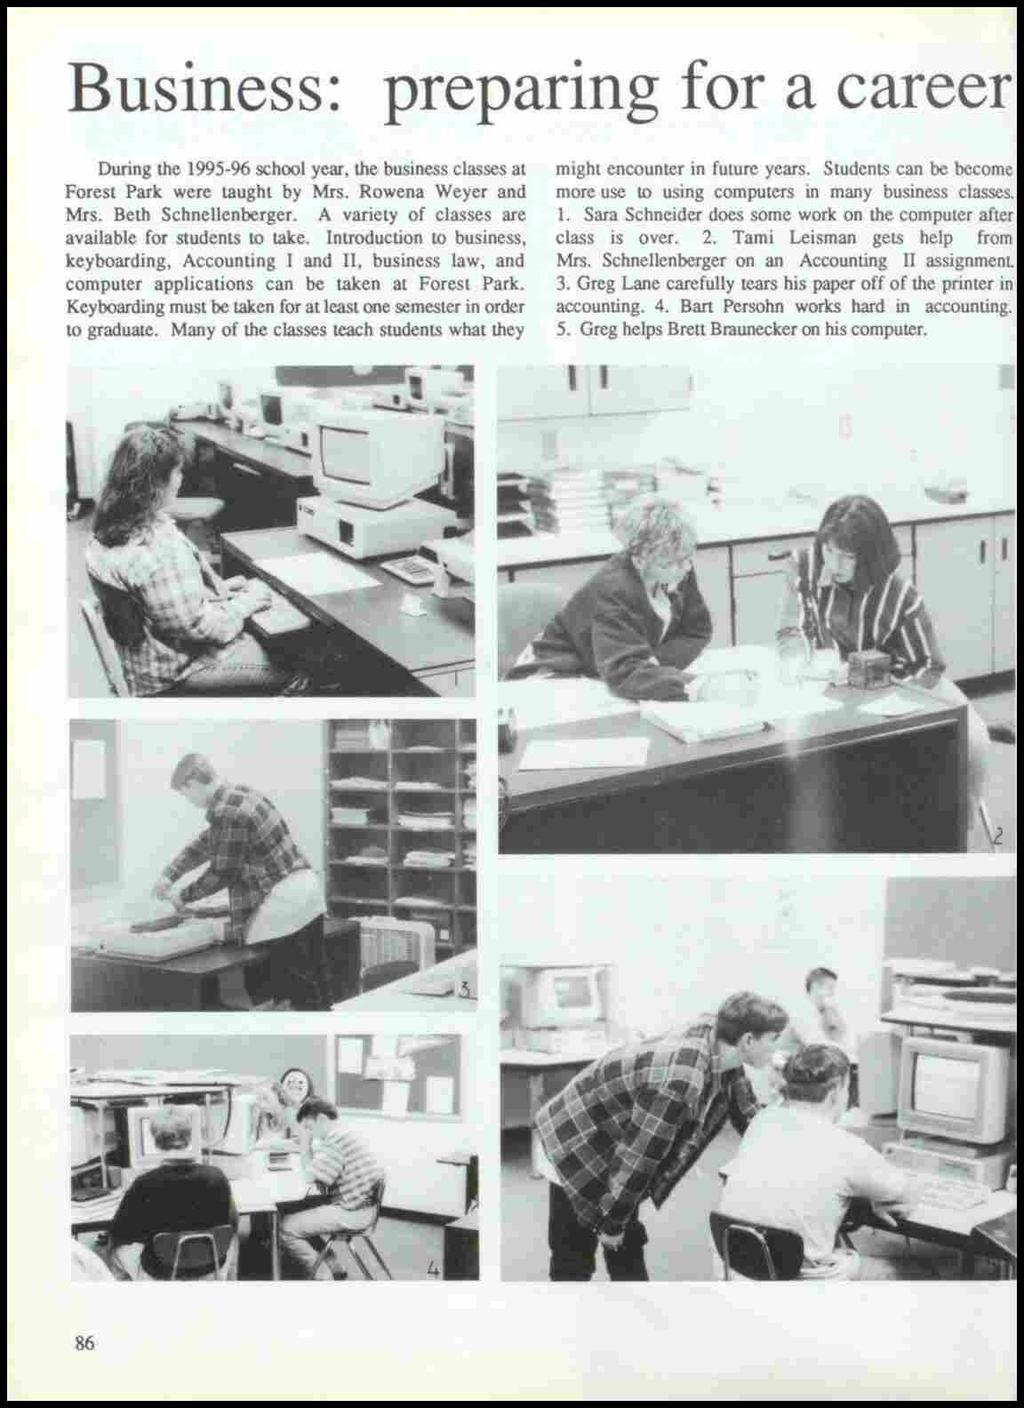 Business: preparing for a career During the 1995-96 school year, the business classes at Forest Park were taught by Mrs. Rowena Weyer and Mrs. Beth Schnellenberger.